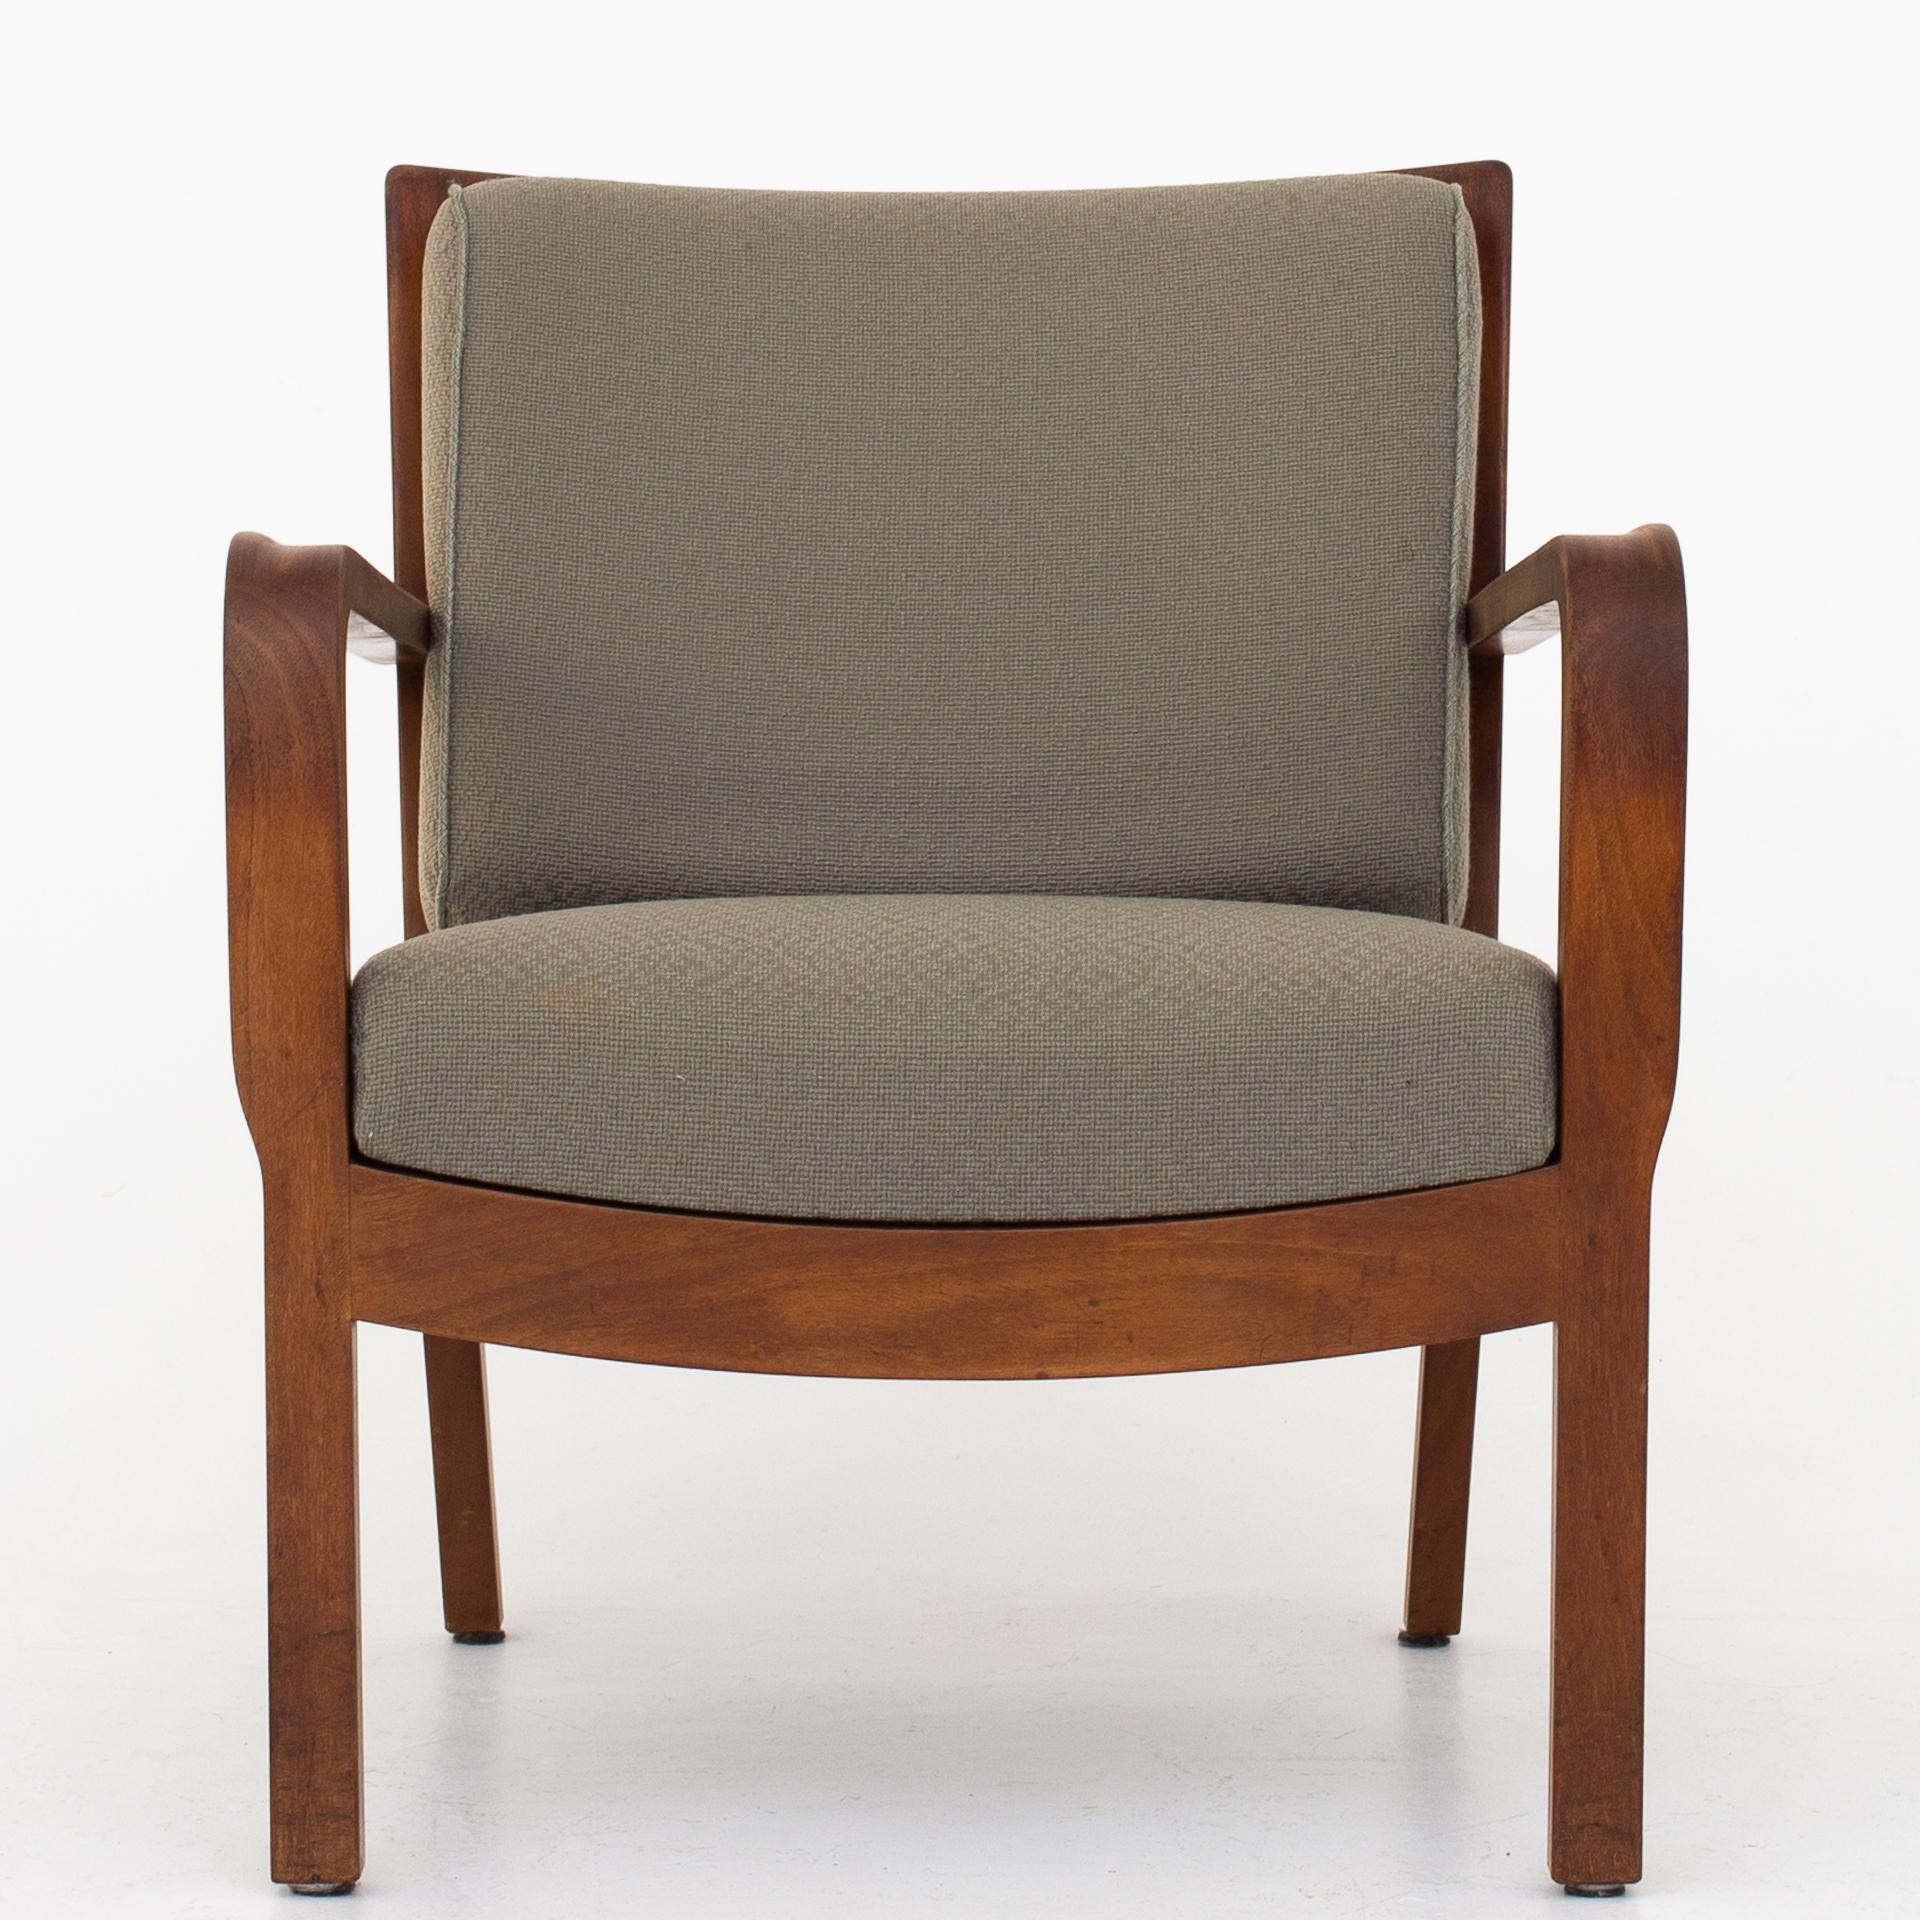 Mahogany Pair of Easy Chairs by Tove & Edvard Kindt Larsen. For Sale